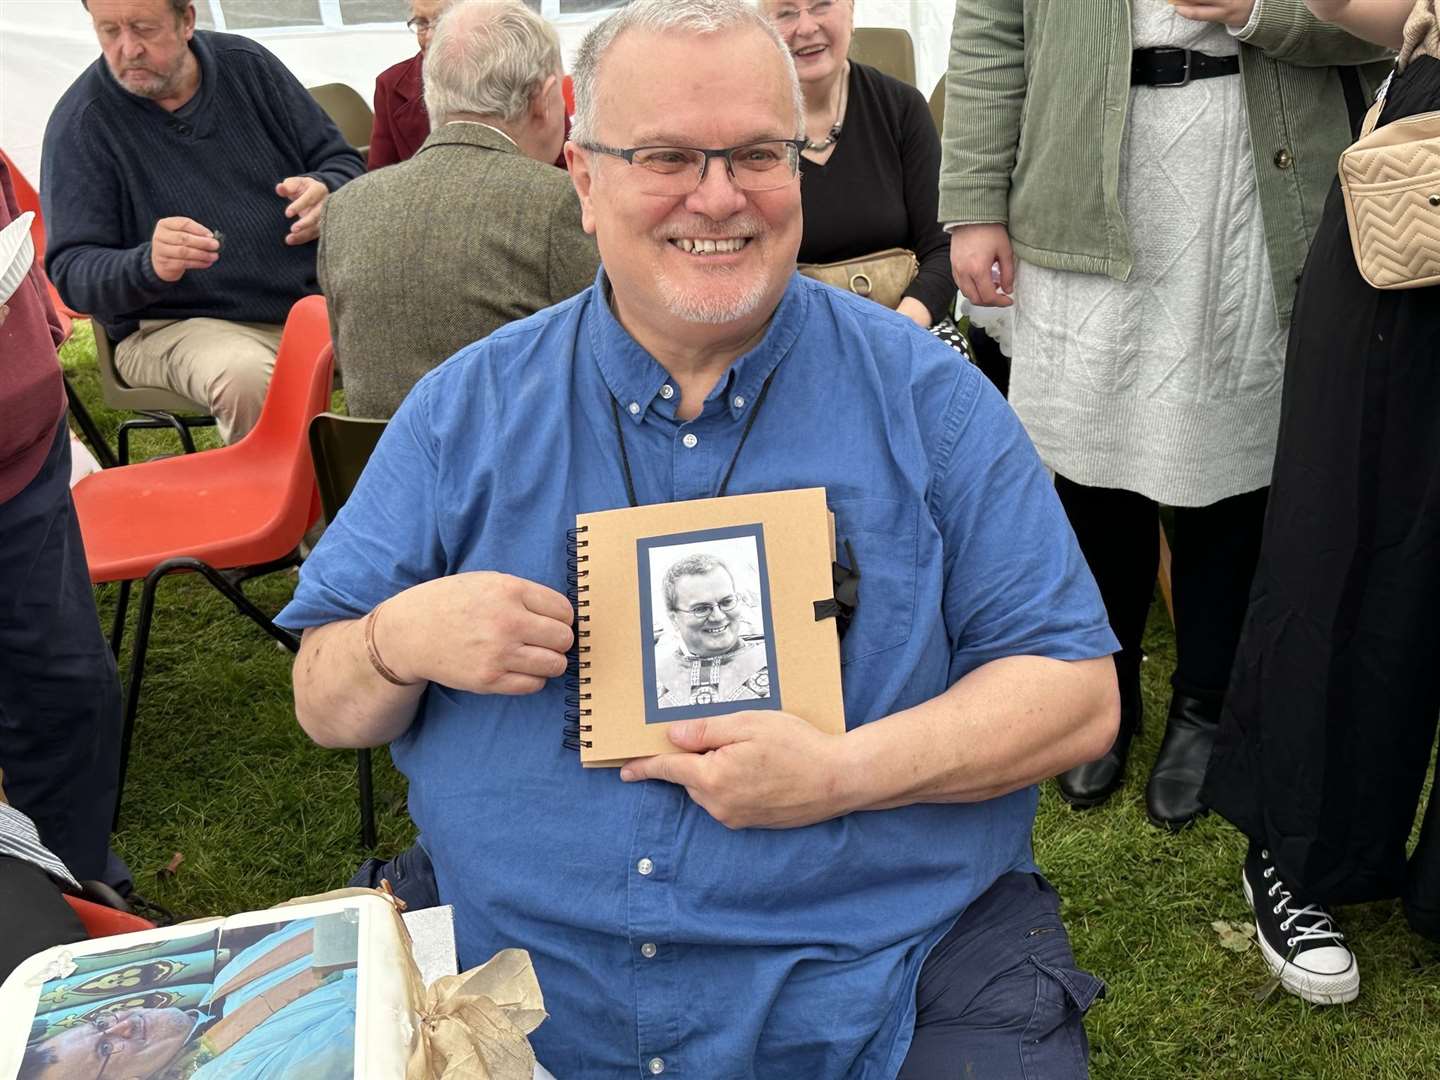 Father Mel was delighted with a book of messages presented to him after the service in Fortrose.